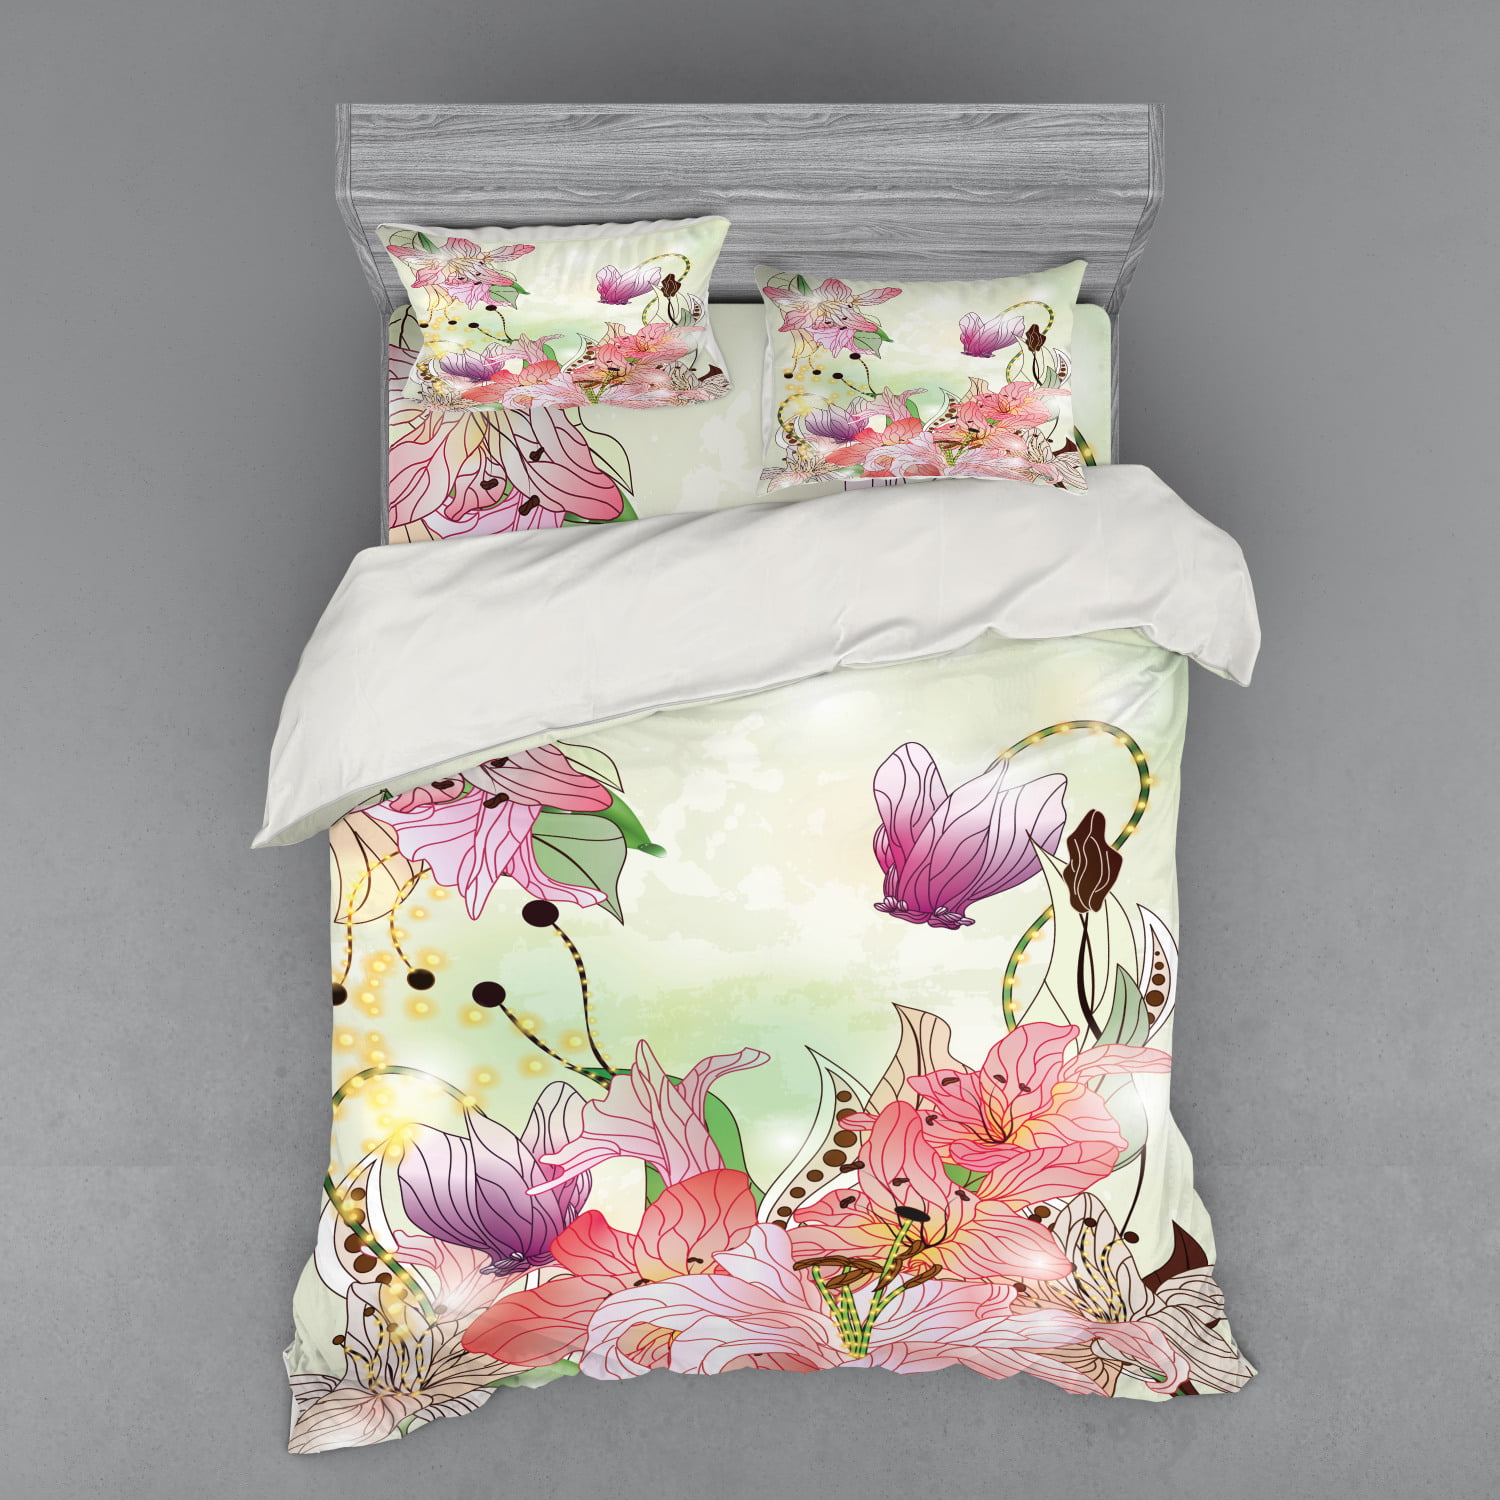 Floral Duvet Cover Set Watercolor Abstract Romantic Nature Themed